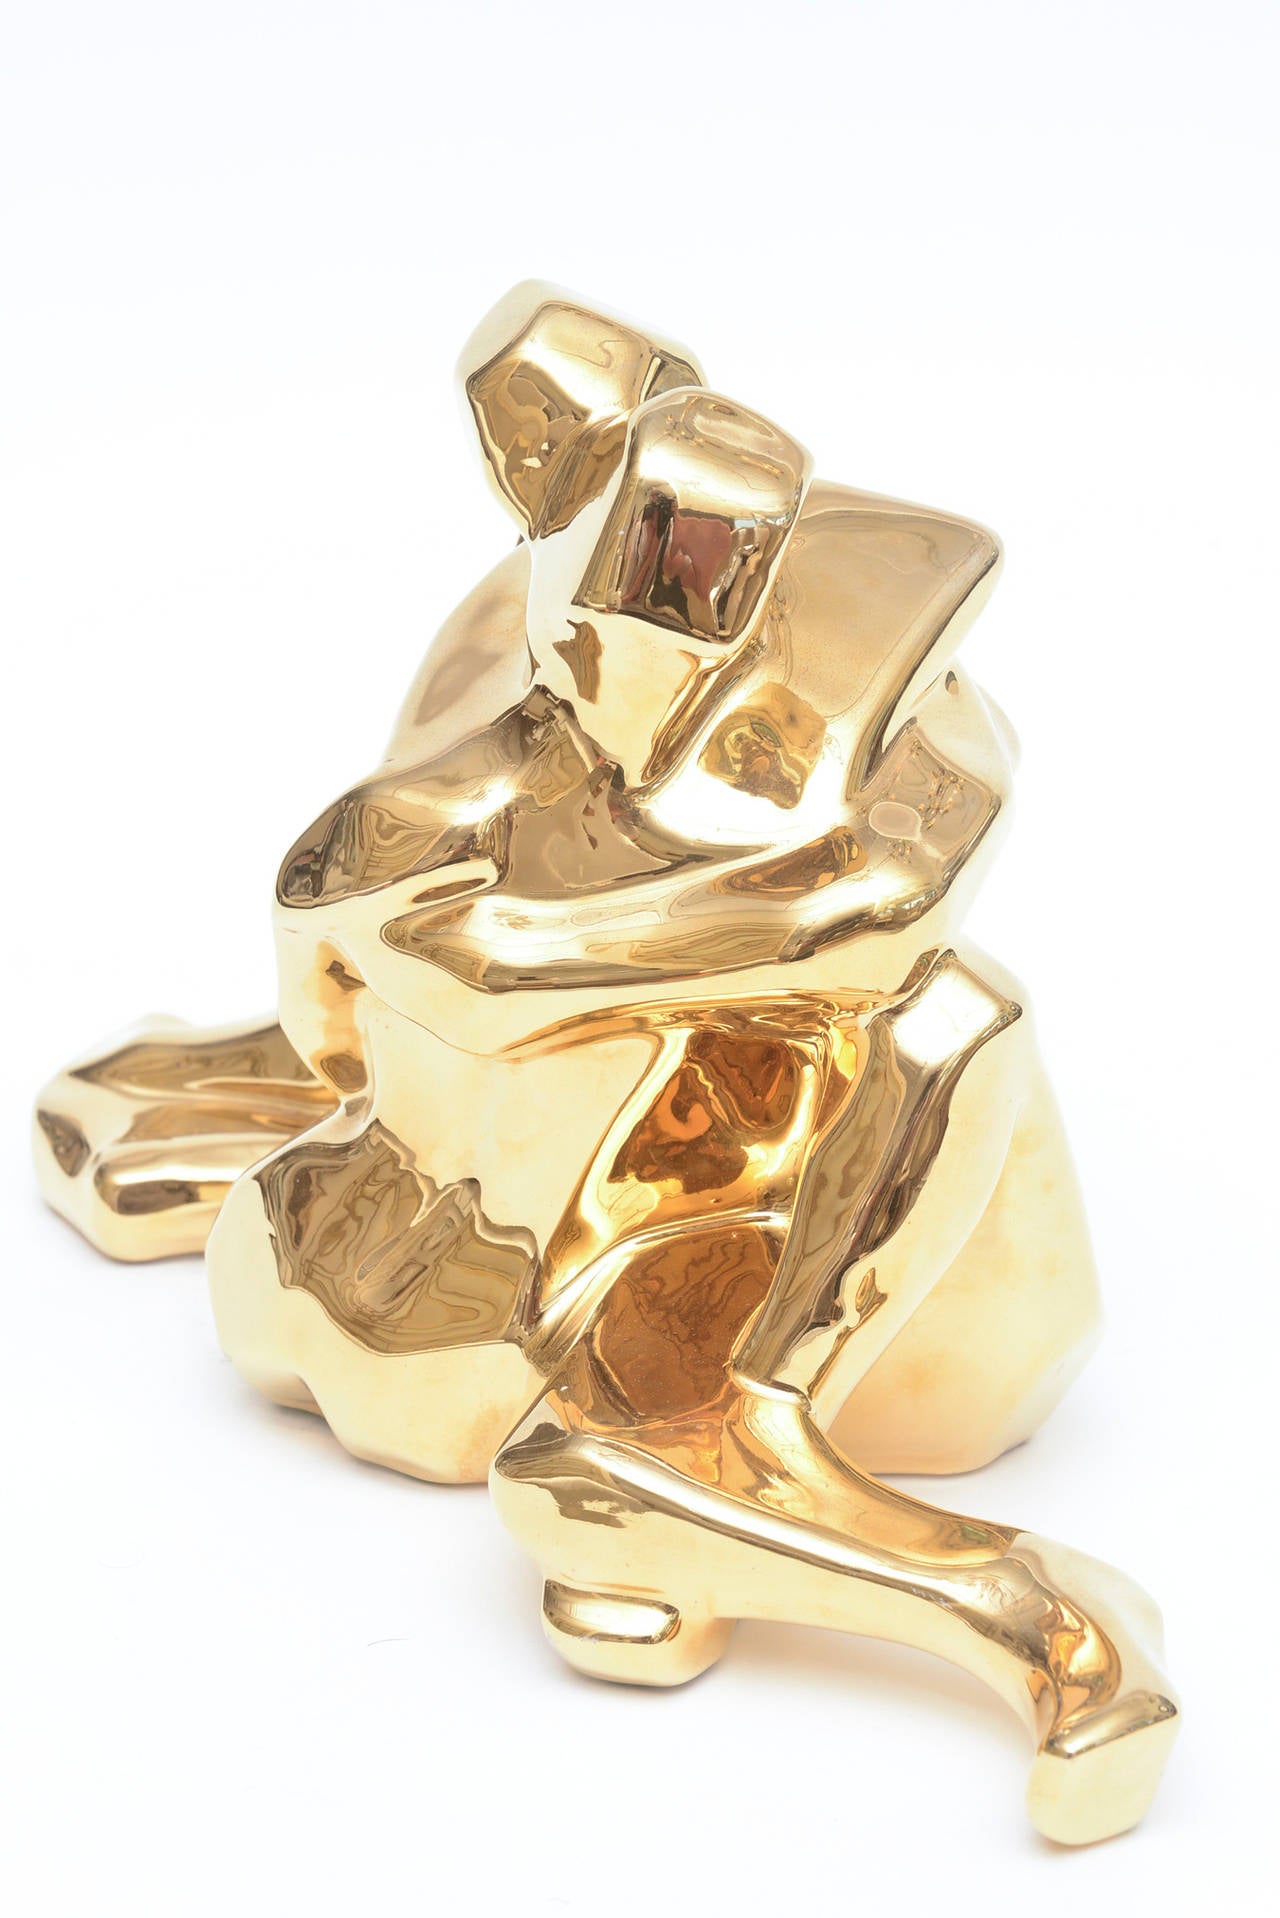 The gold plating over the ceramic is rich with attention...and intention..
The cubist form of the two lovers is romantic.
A great sculpture from the California based company from the period. It is signed and dated with the original sticker on